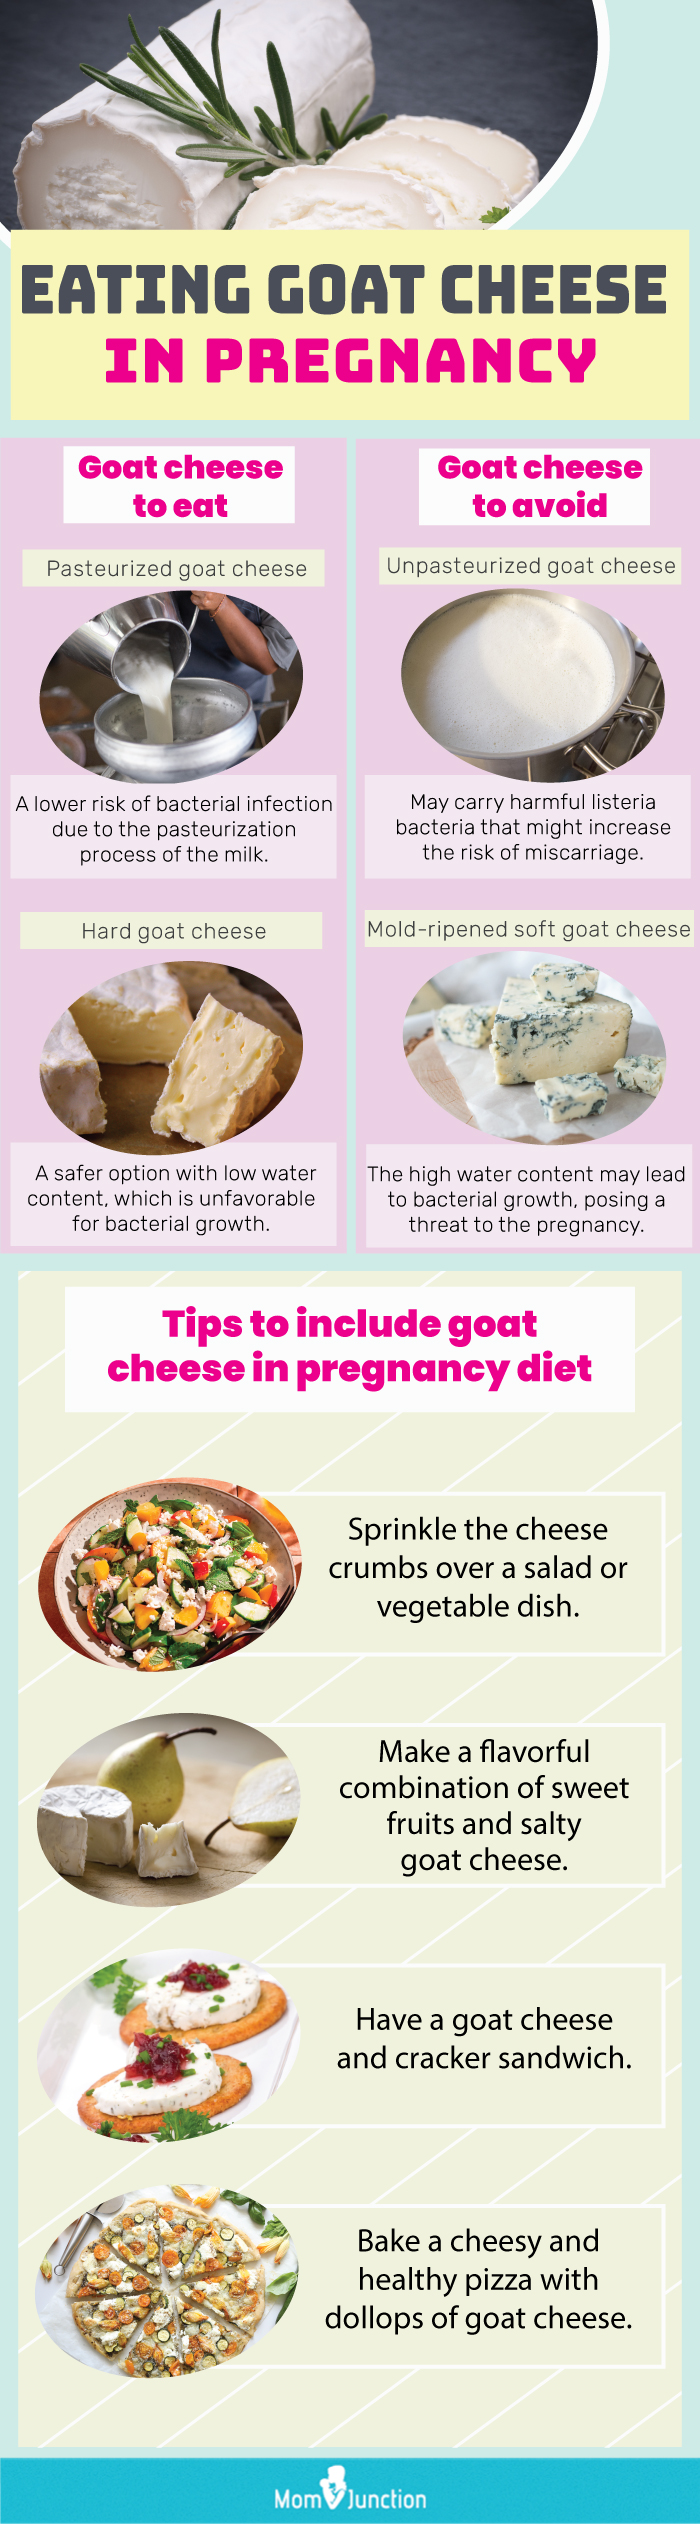 goat cheese to eat and avoid when pregnant (infographic)